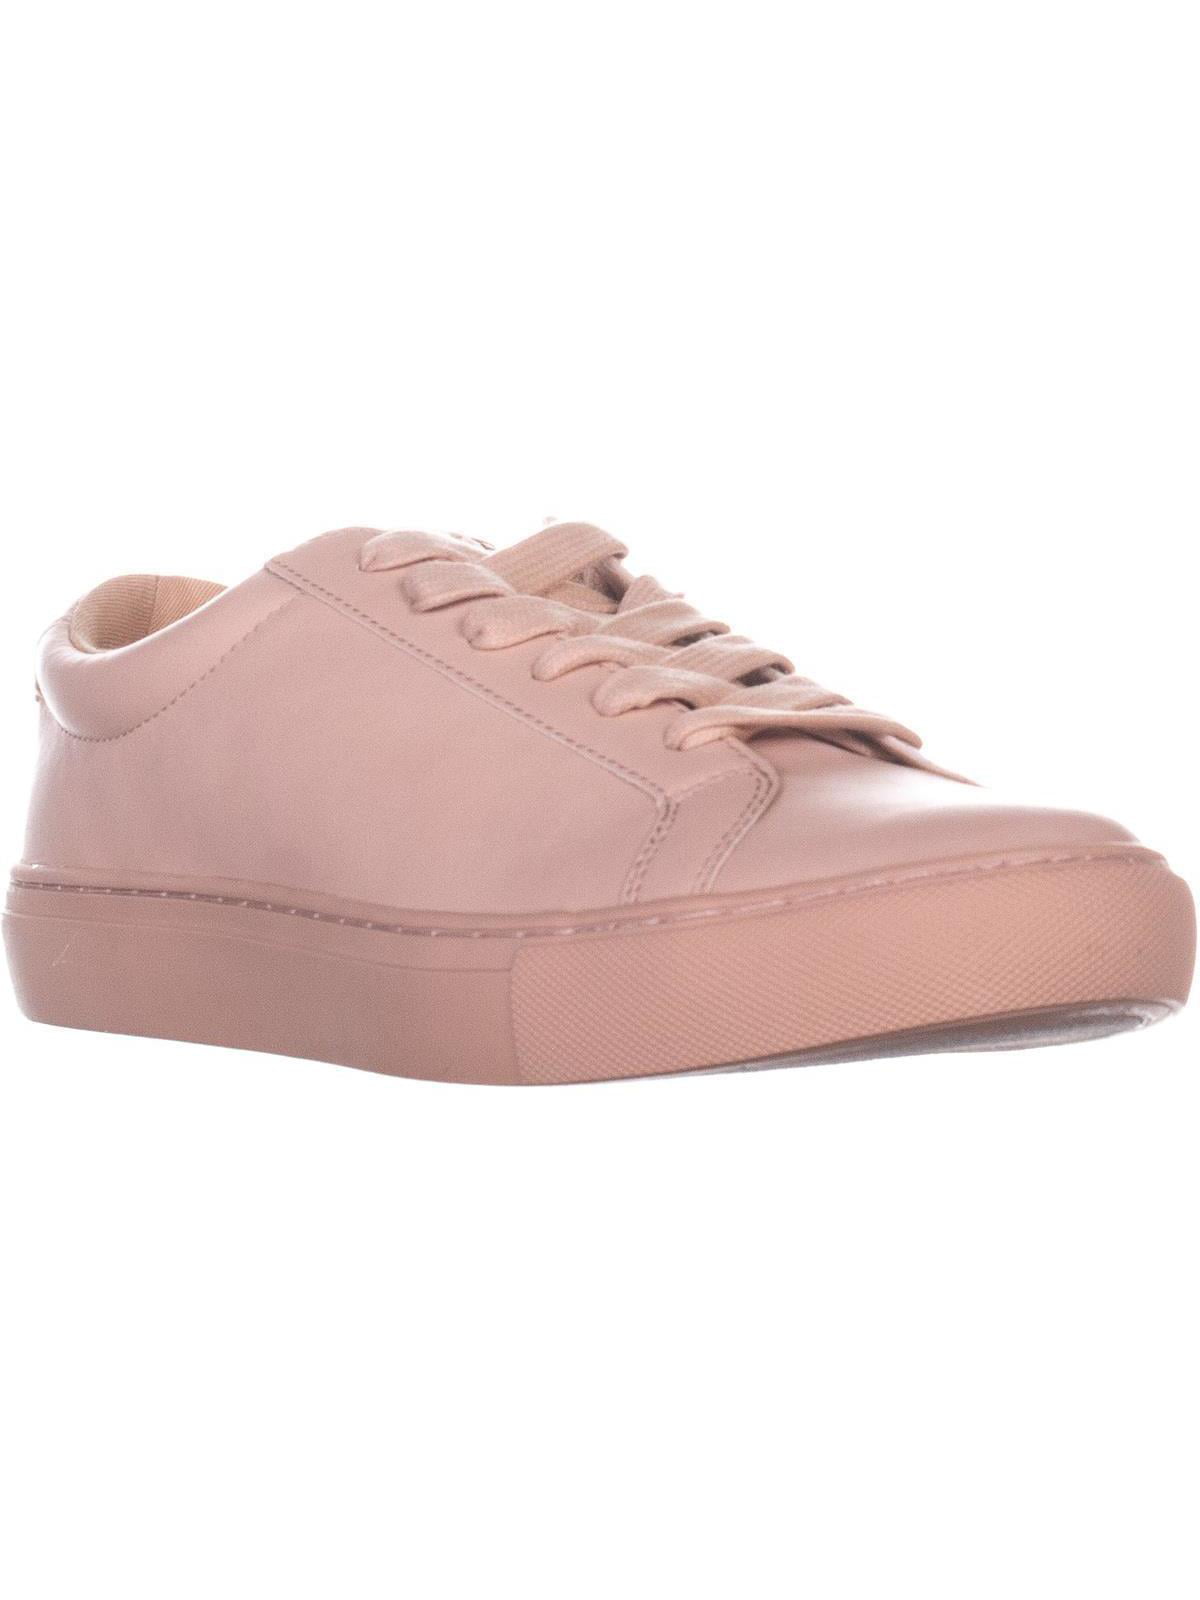 Womens Guess Mens Barette Lace Up Sneakers, Light Pink - 0